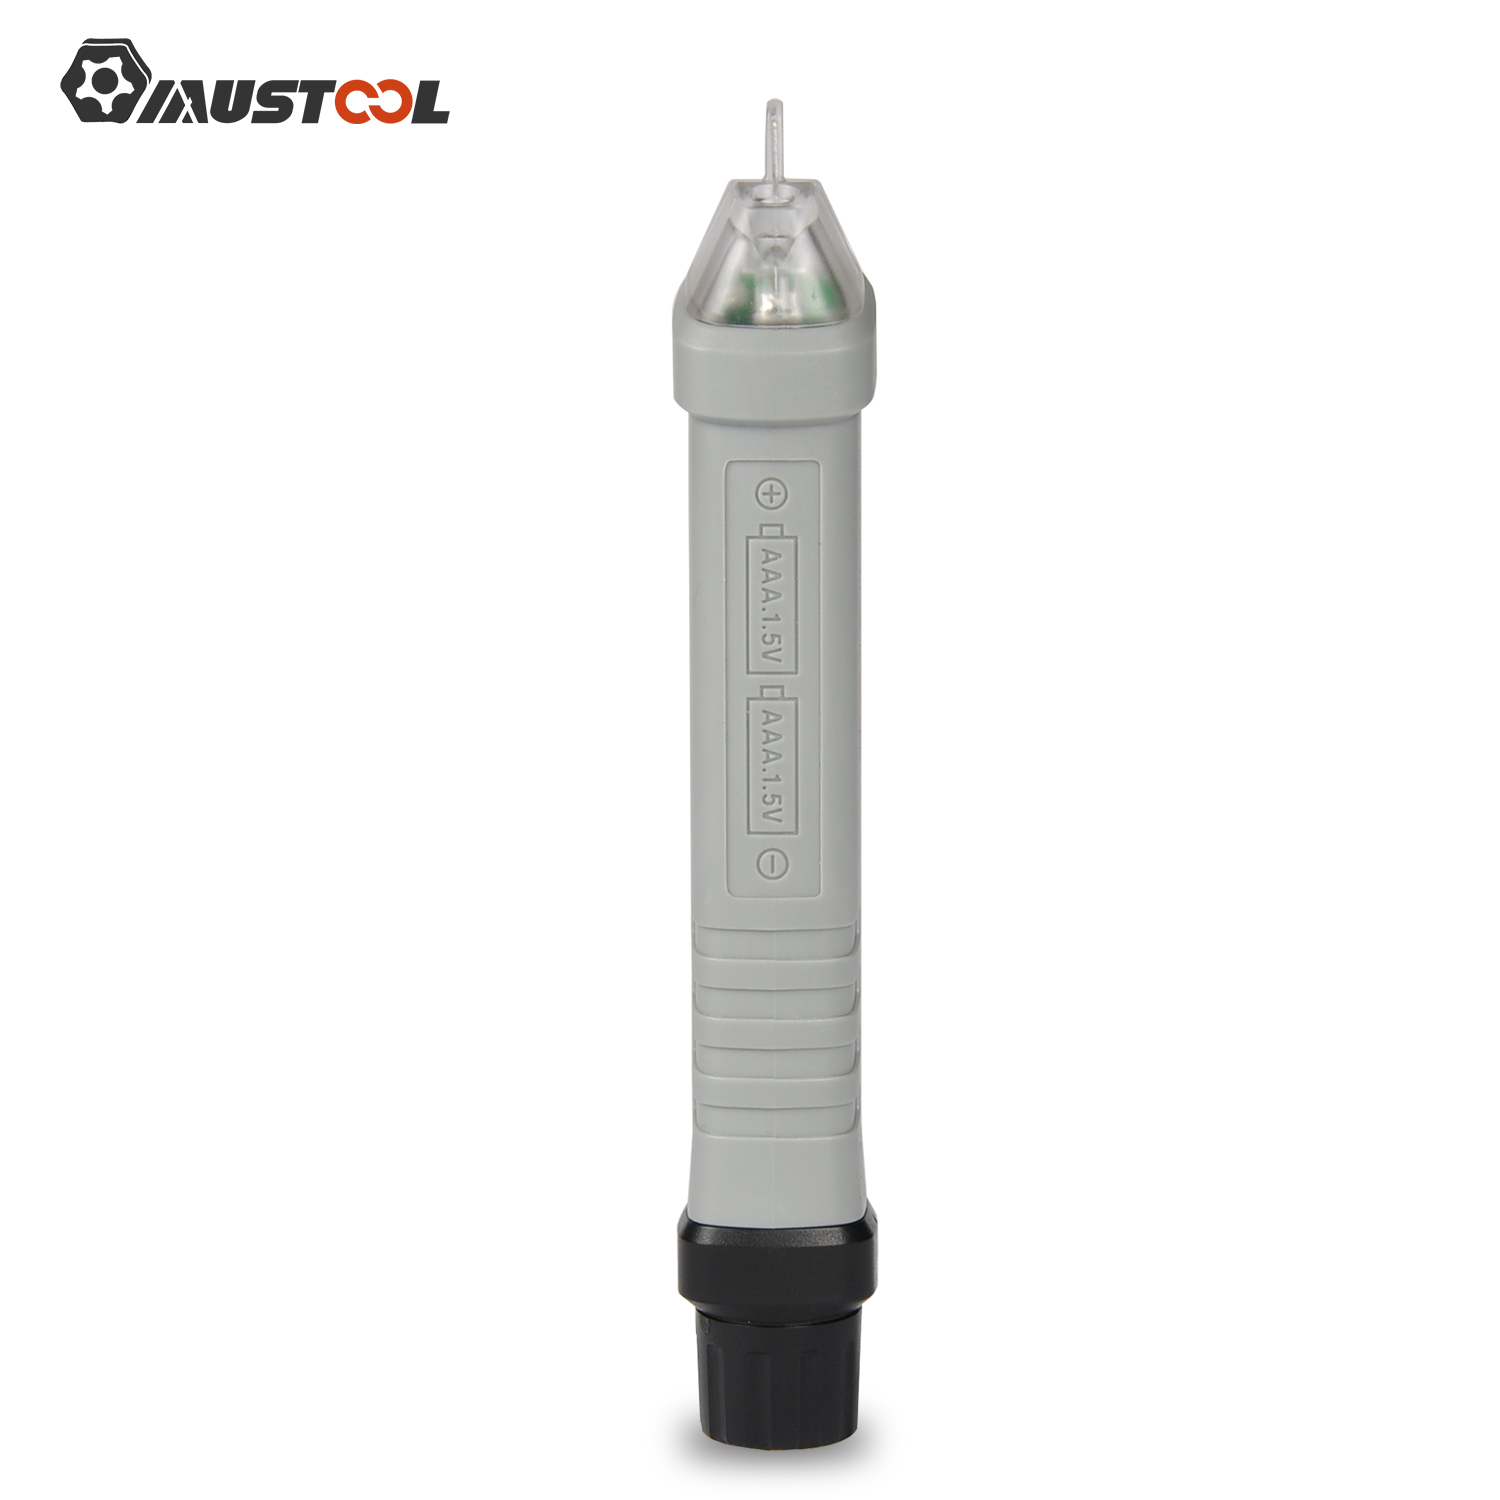 MUSTOOL-MT812-Multifunctional-AC-12-1000V-Non-Contact-Voltage-Tester-Pen-1140451